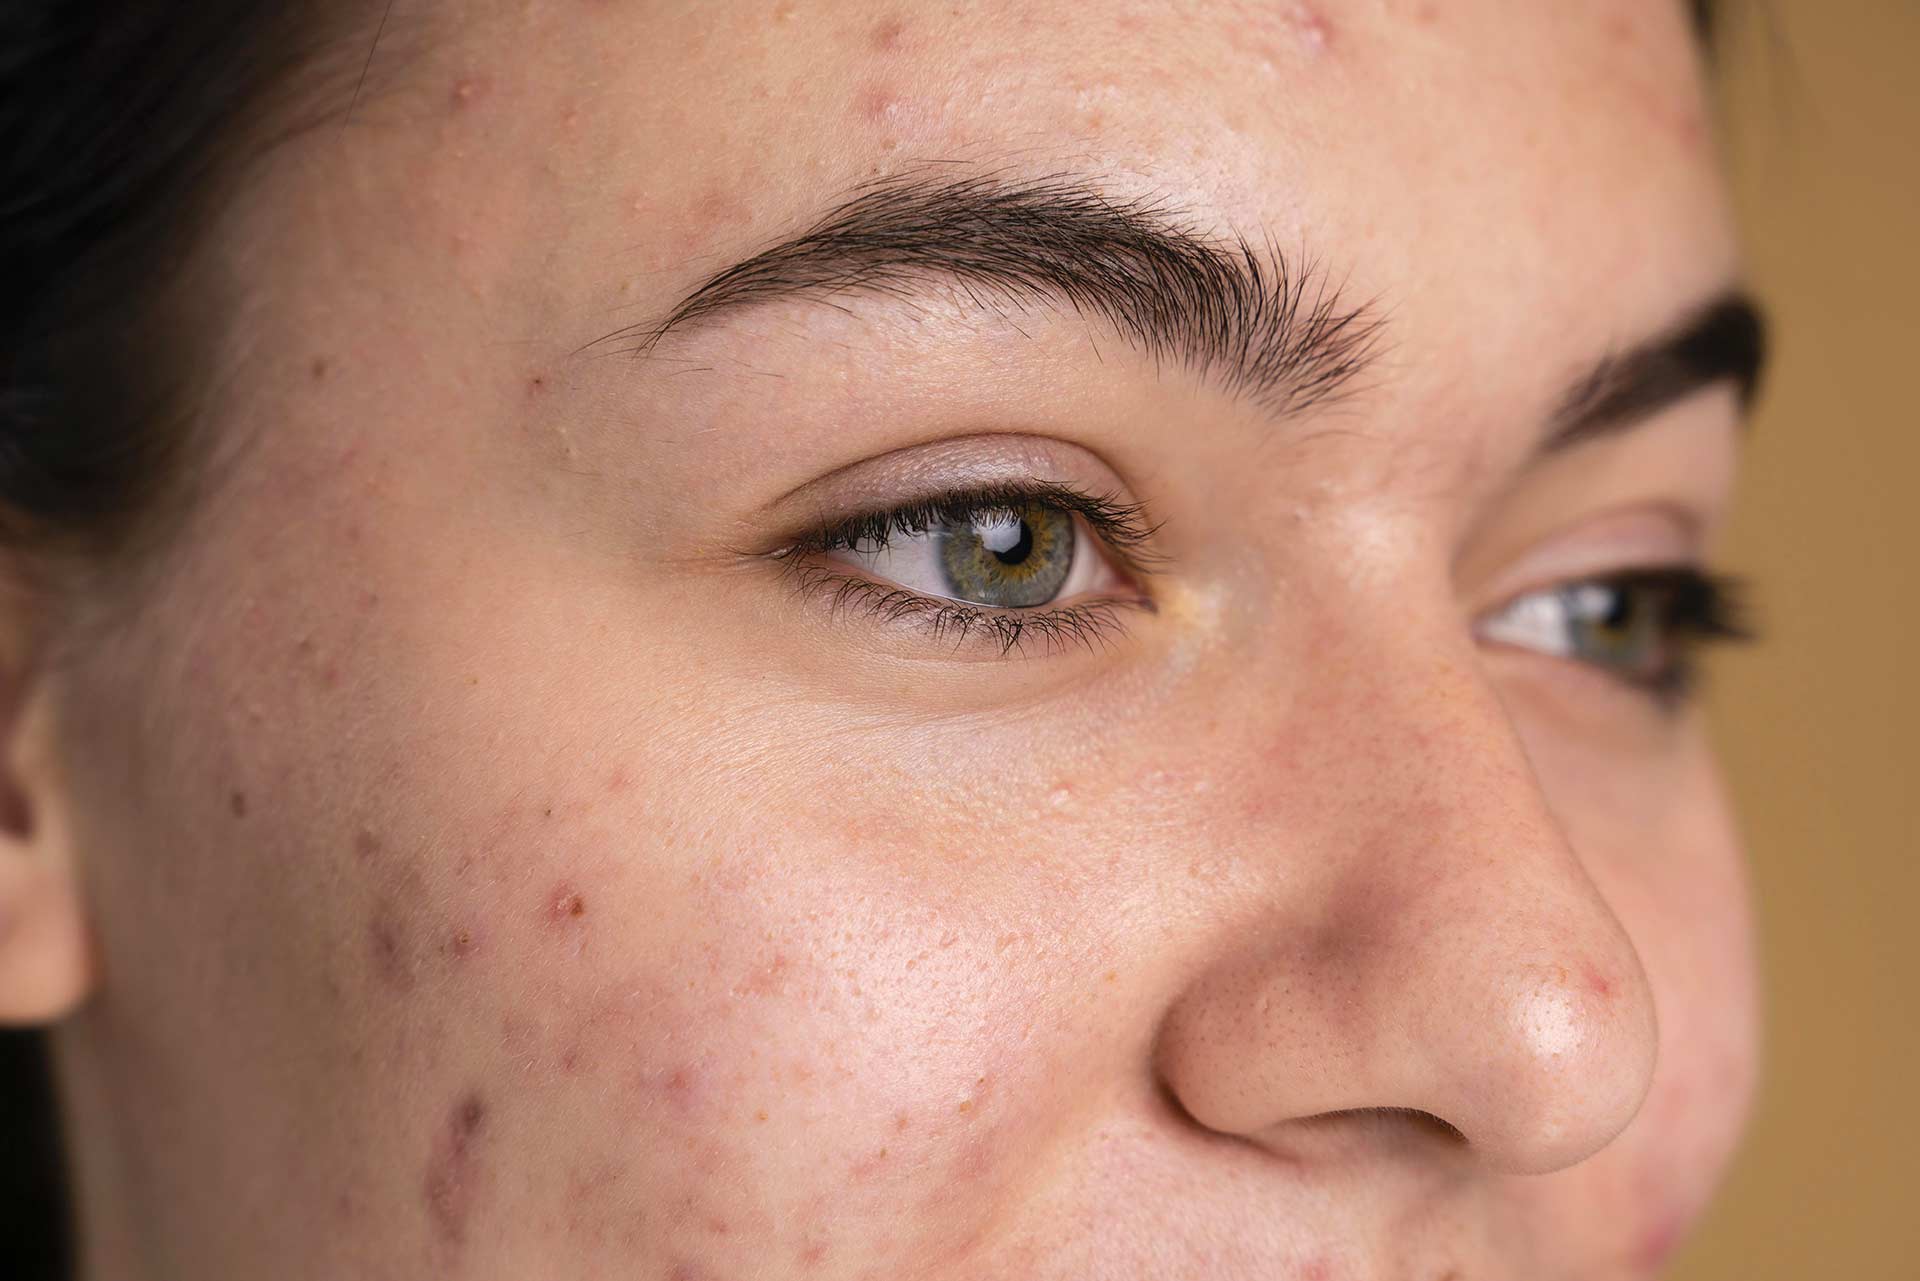 How to Get Rid of Acne Scars